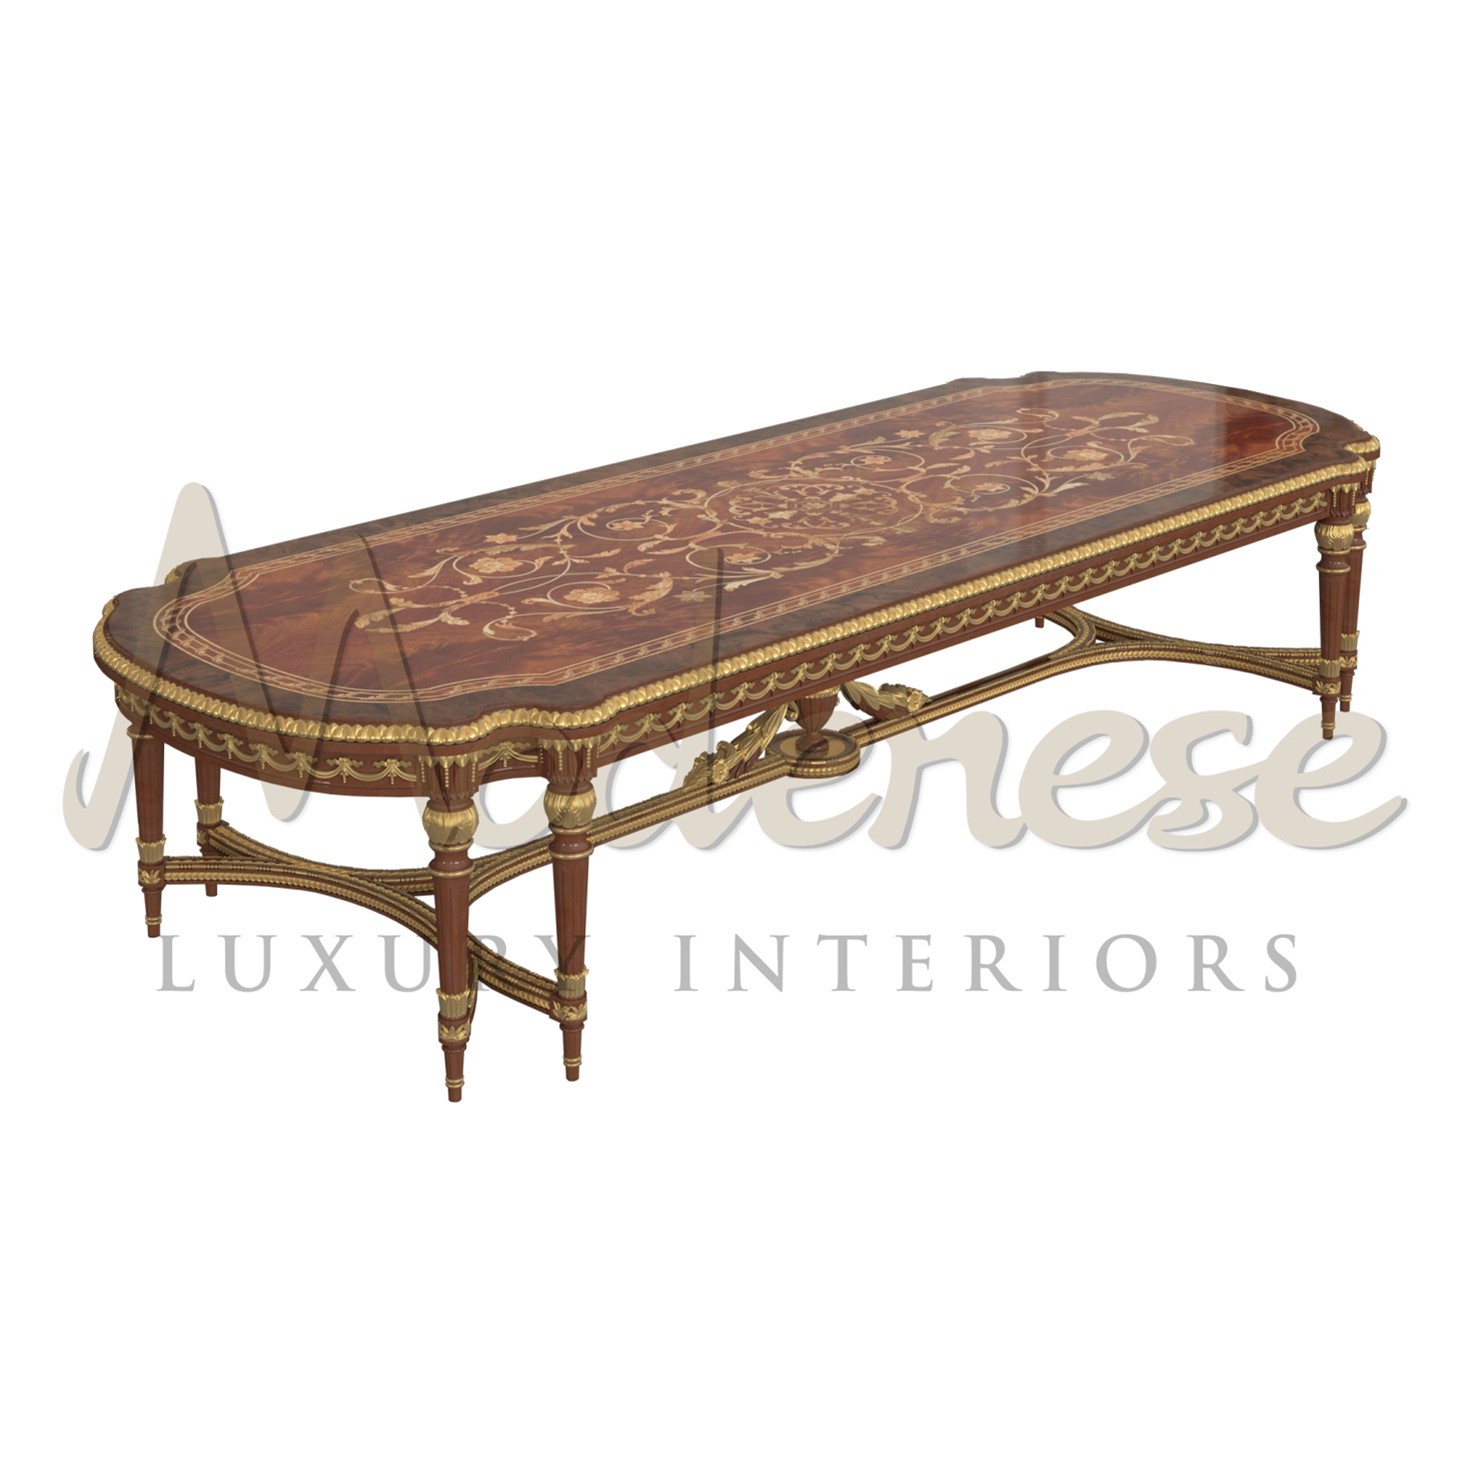 GREAT FURNITURE DIRECT FROM BEST FURNITURE STORE IN NEW YORK